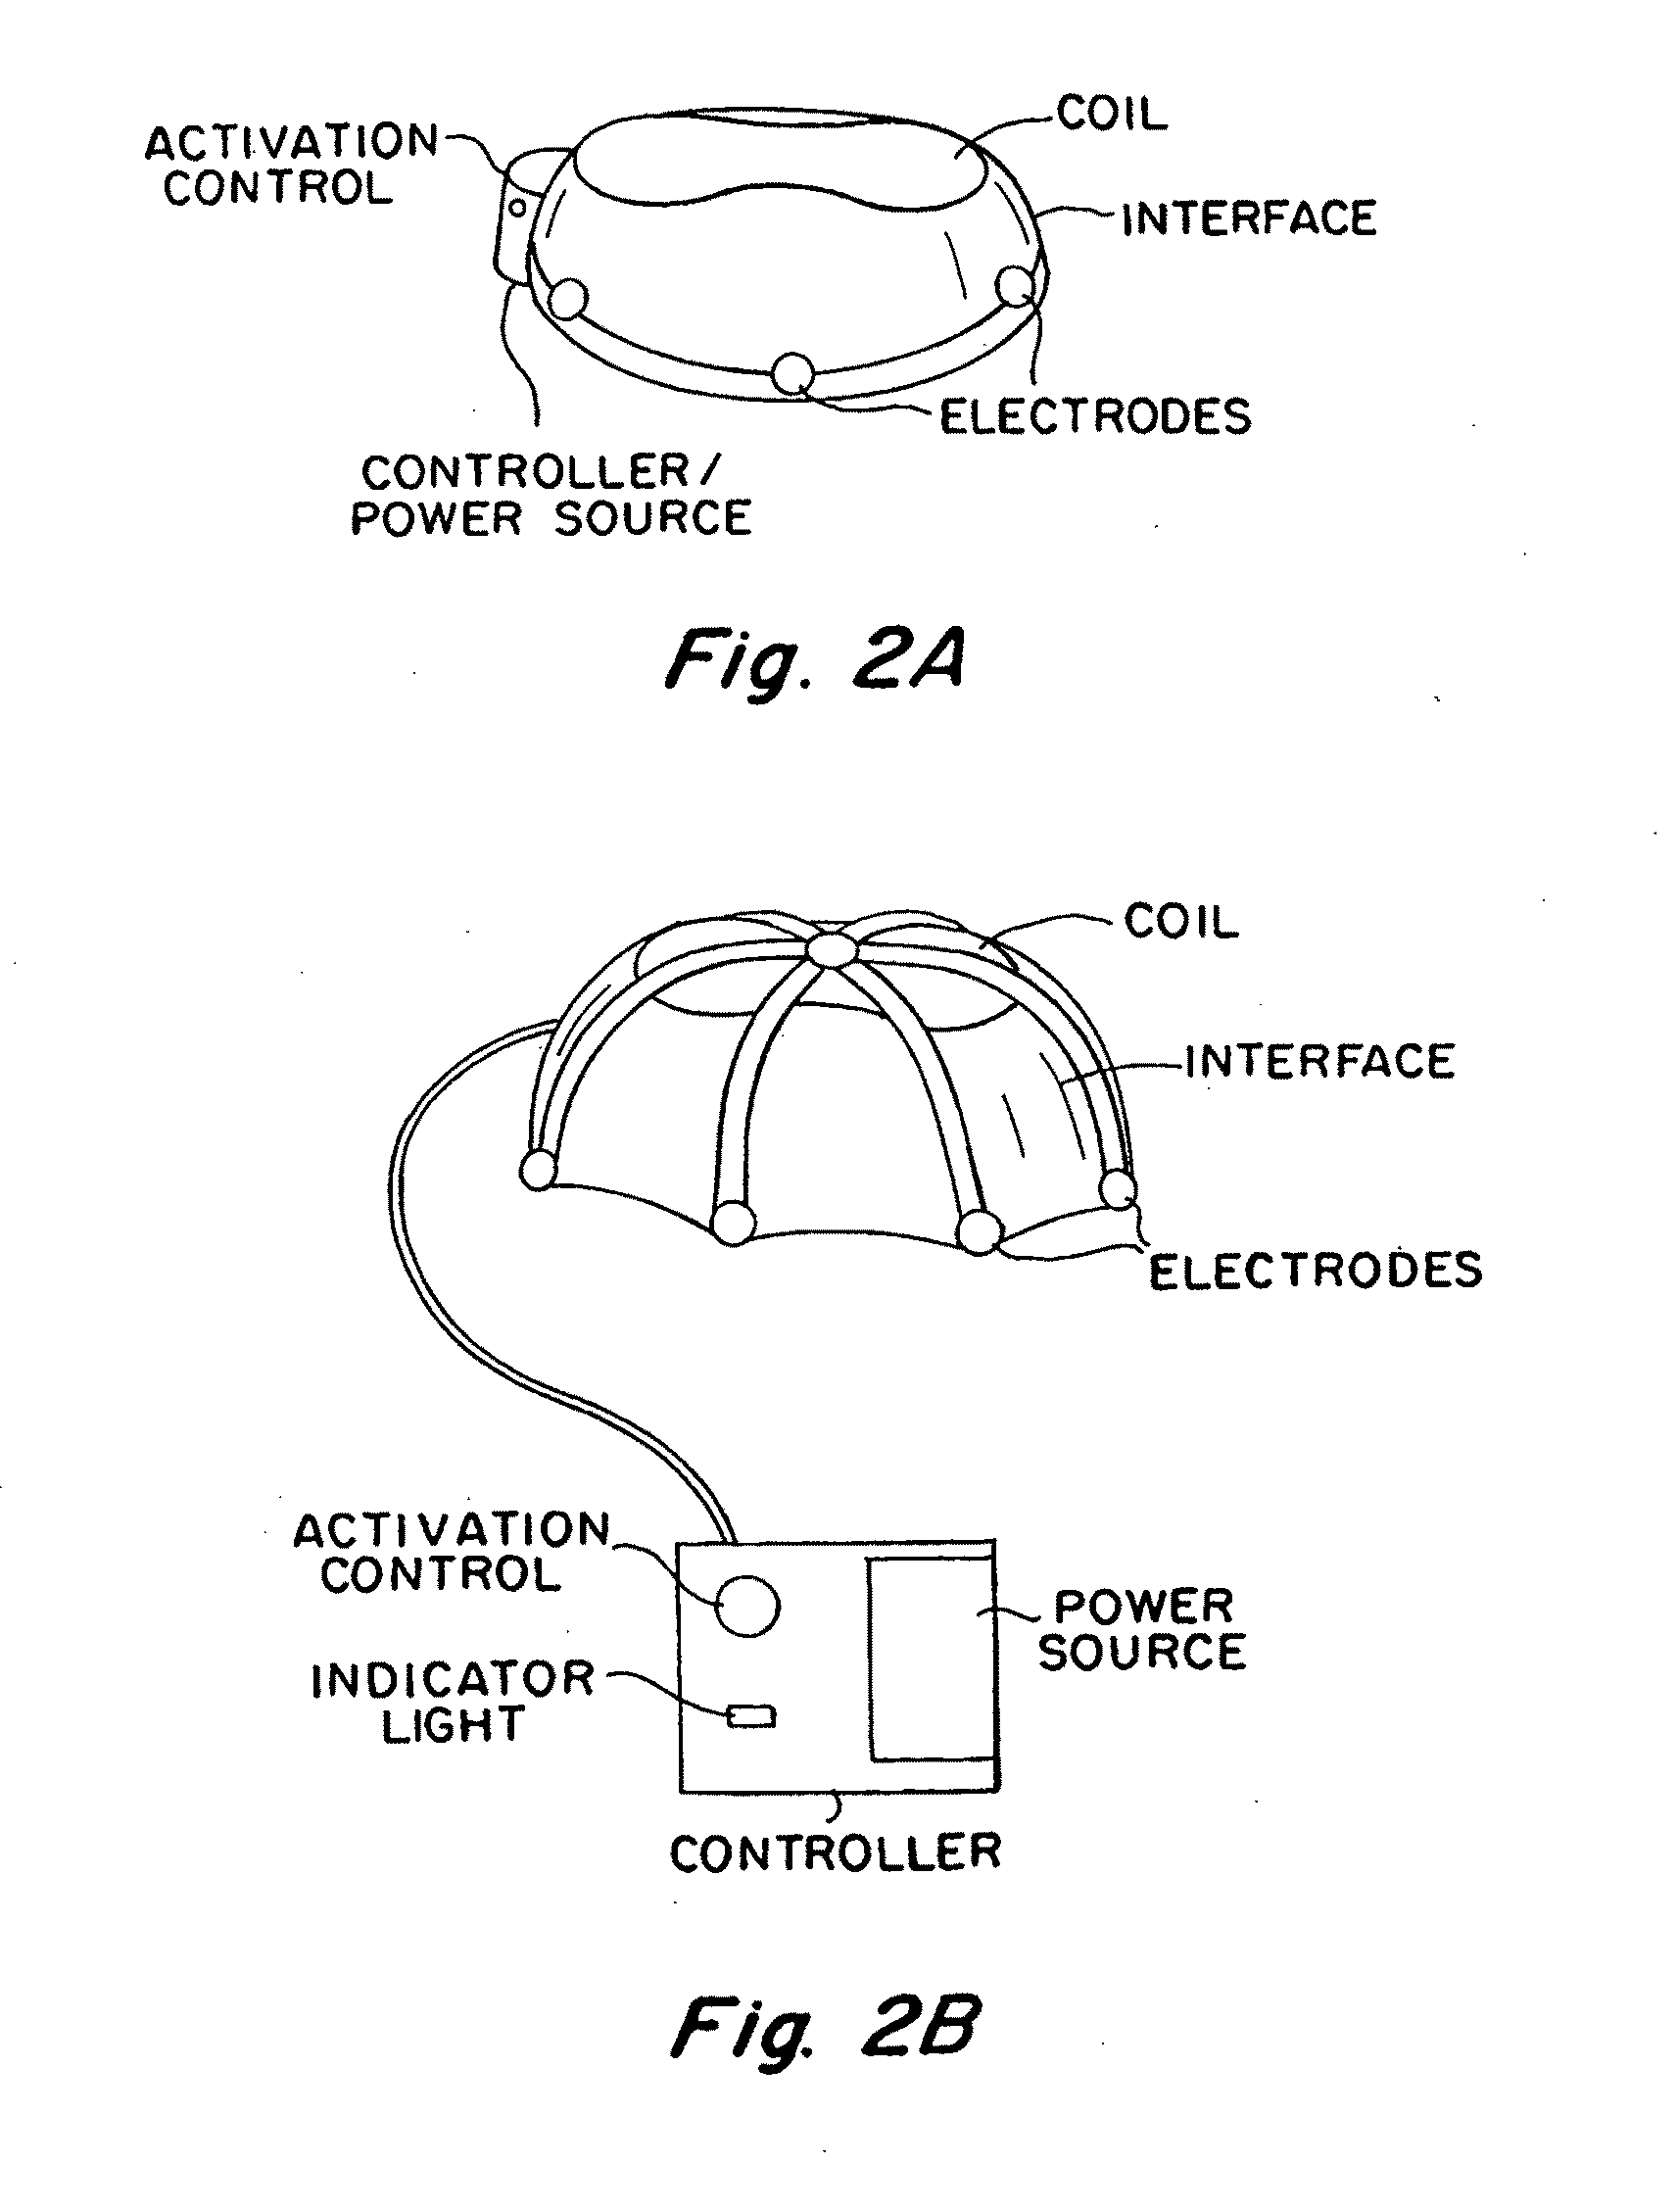 Transcranial magnetic stimulation (TMS) methods and apparatus